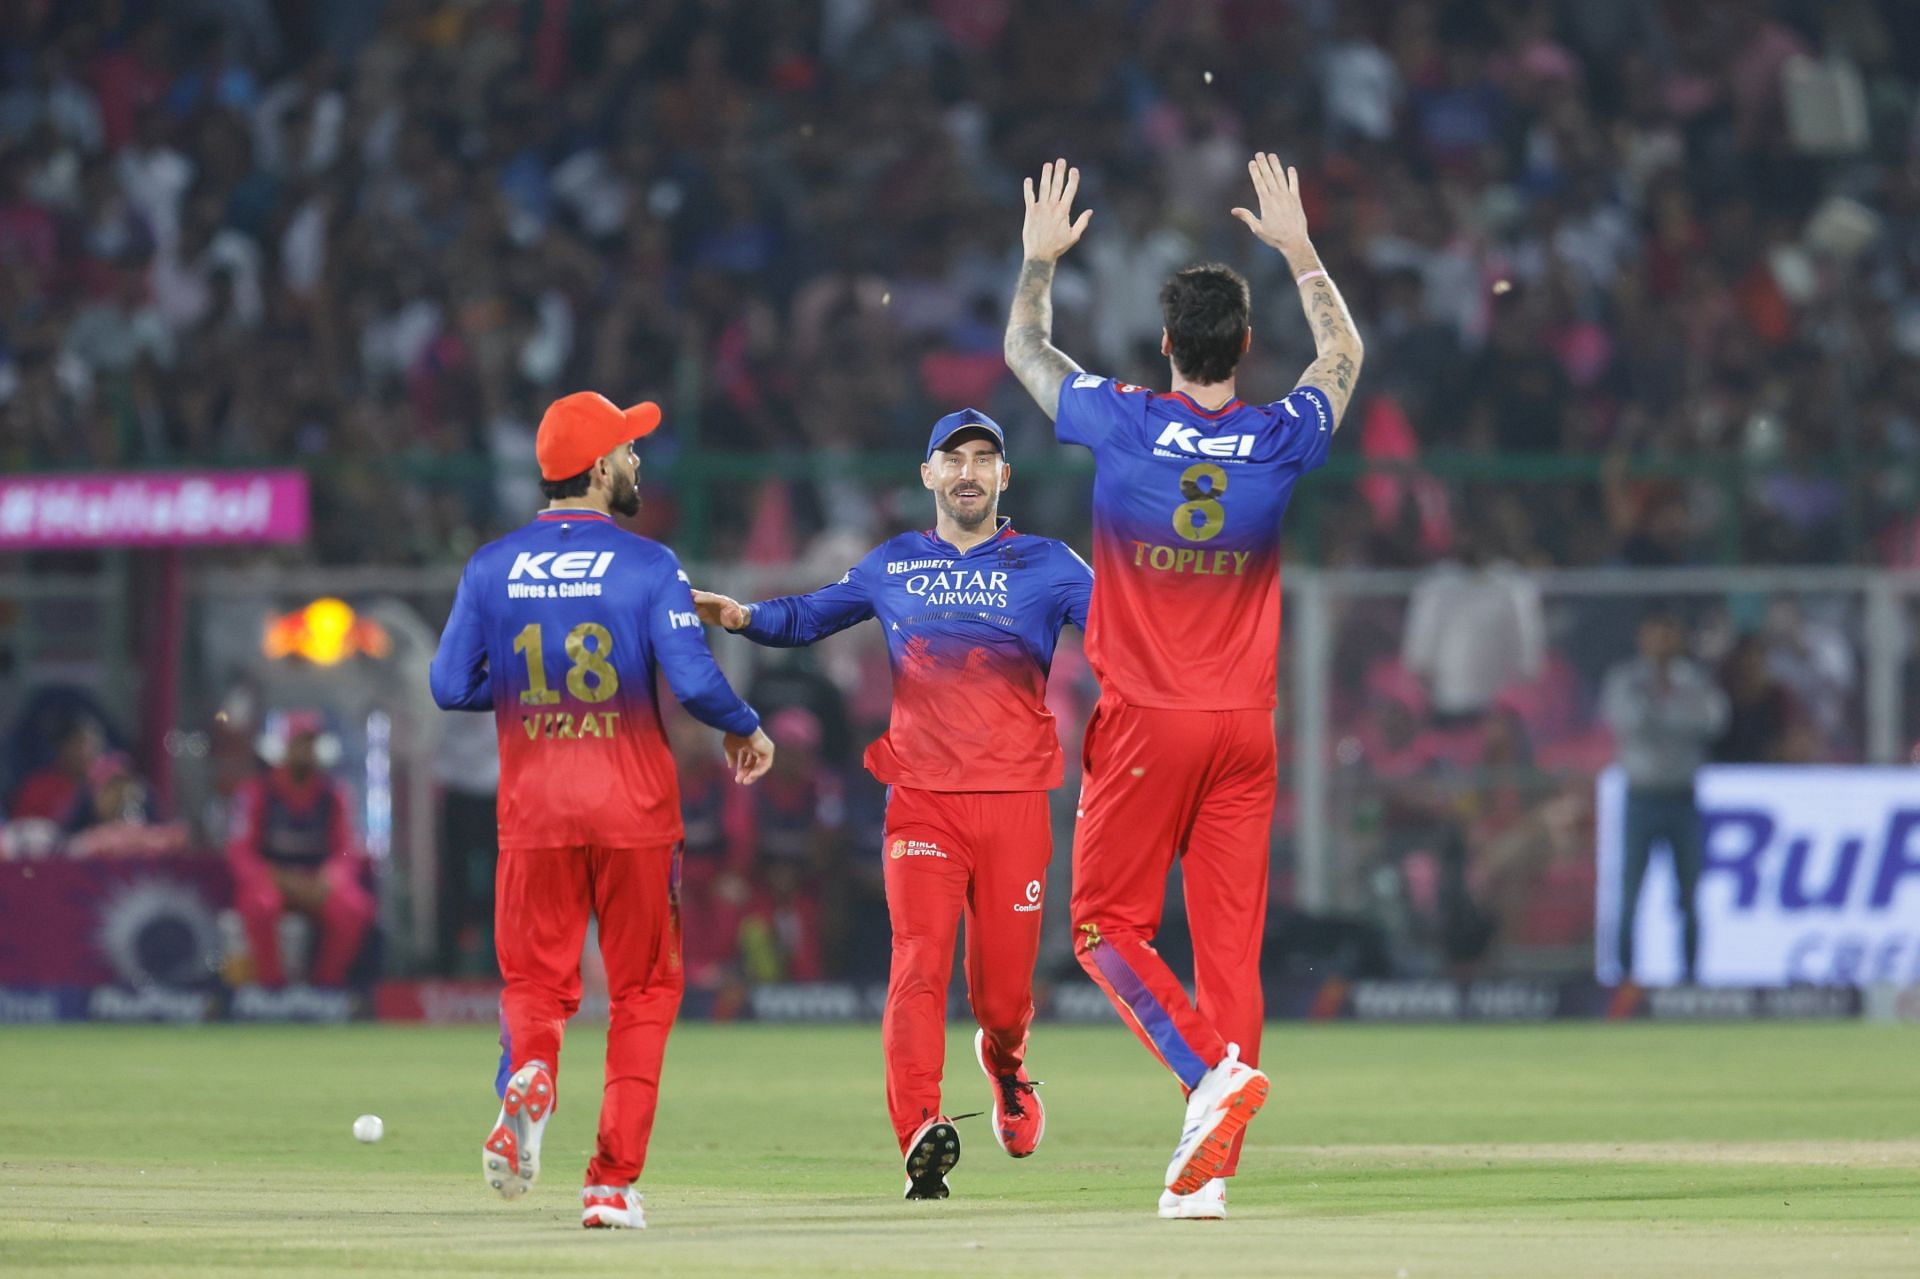 Reece Topley celebrates his wicket. (Credits: Twitter)